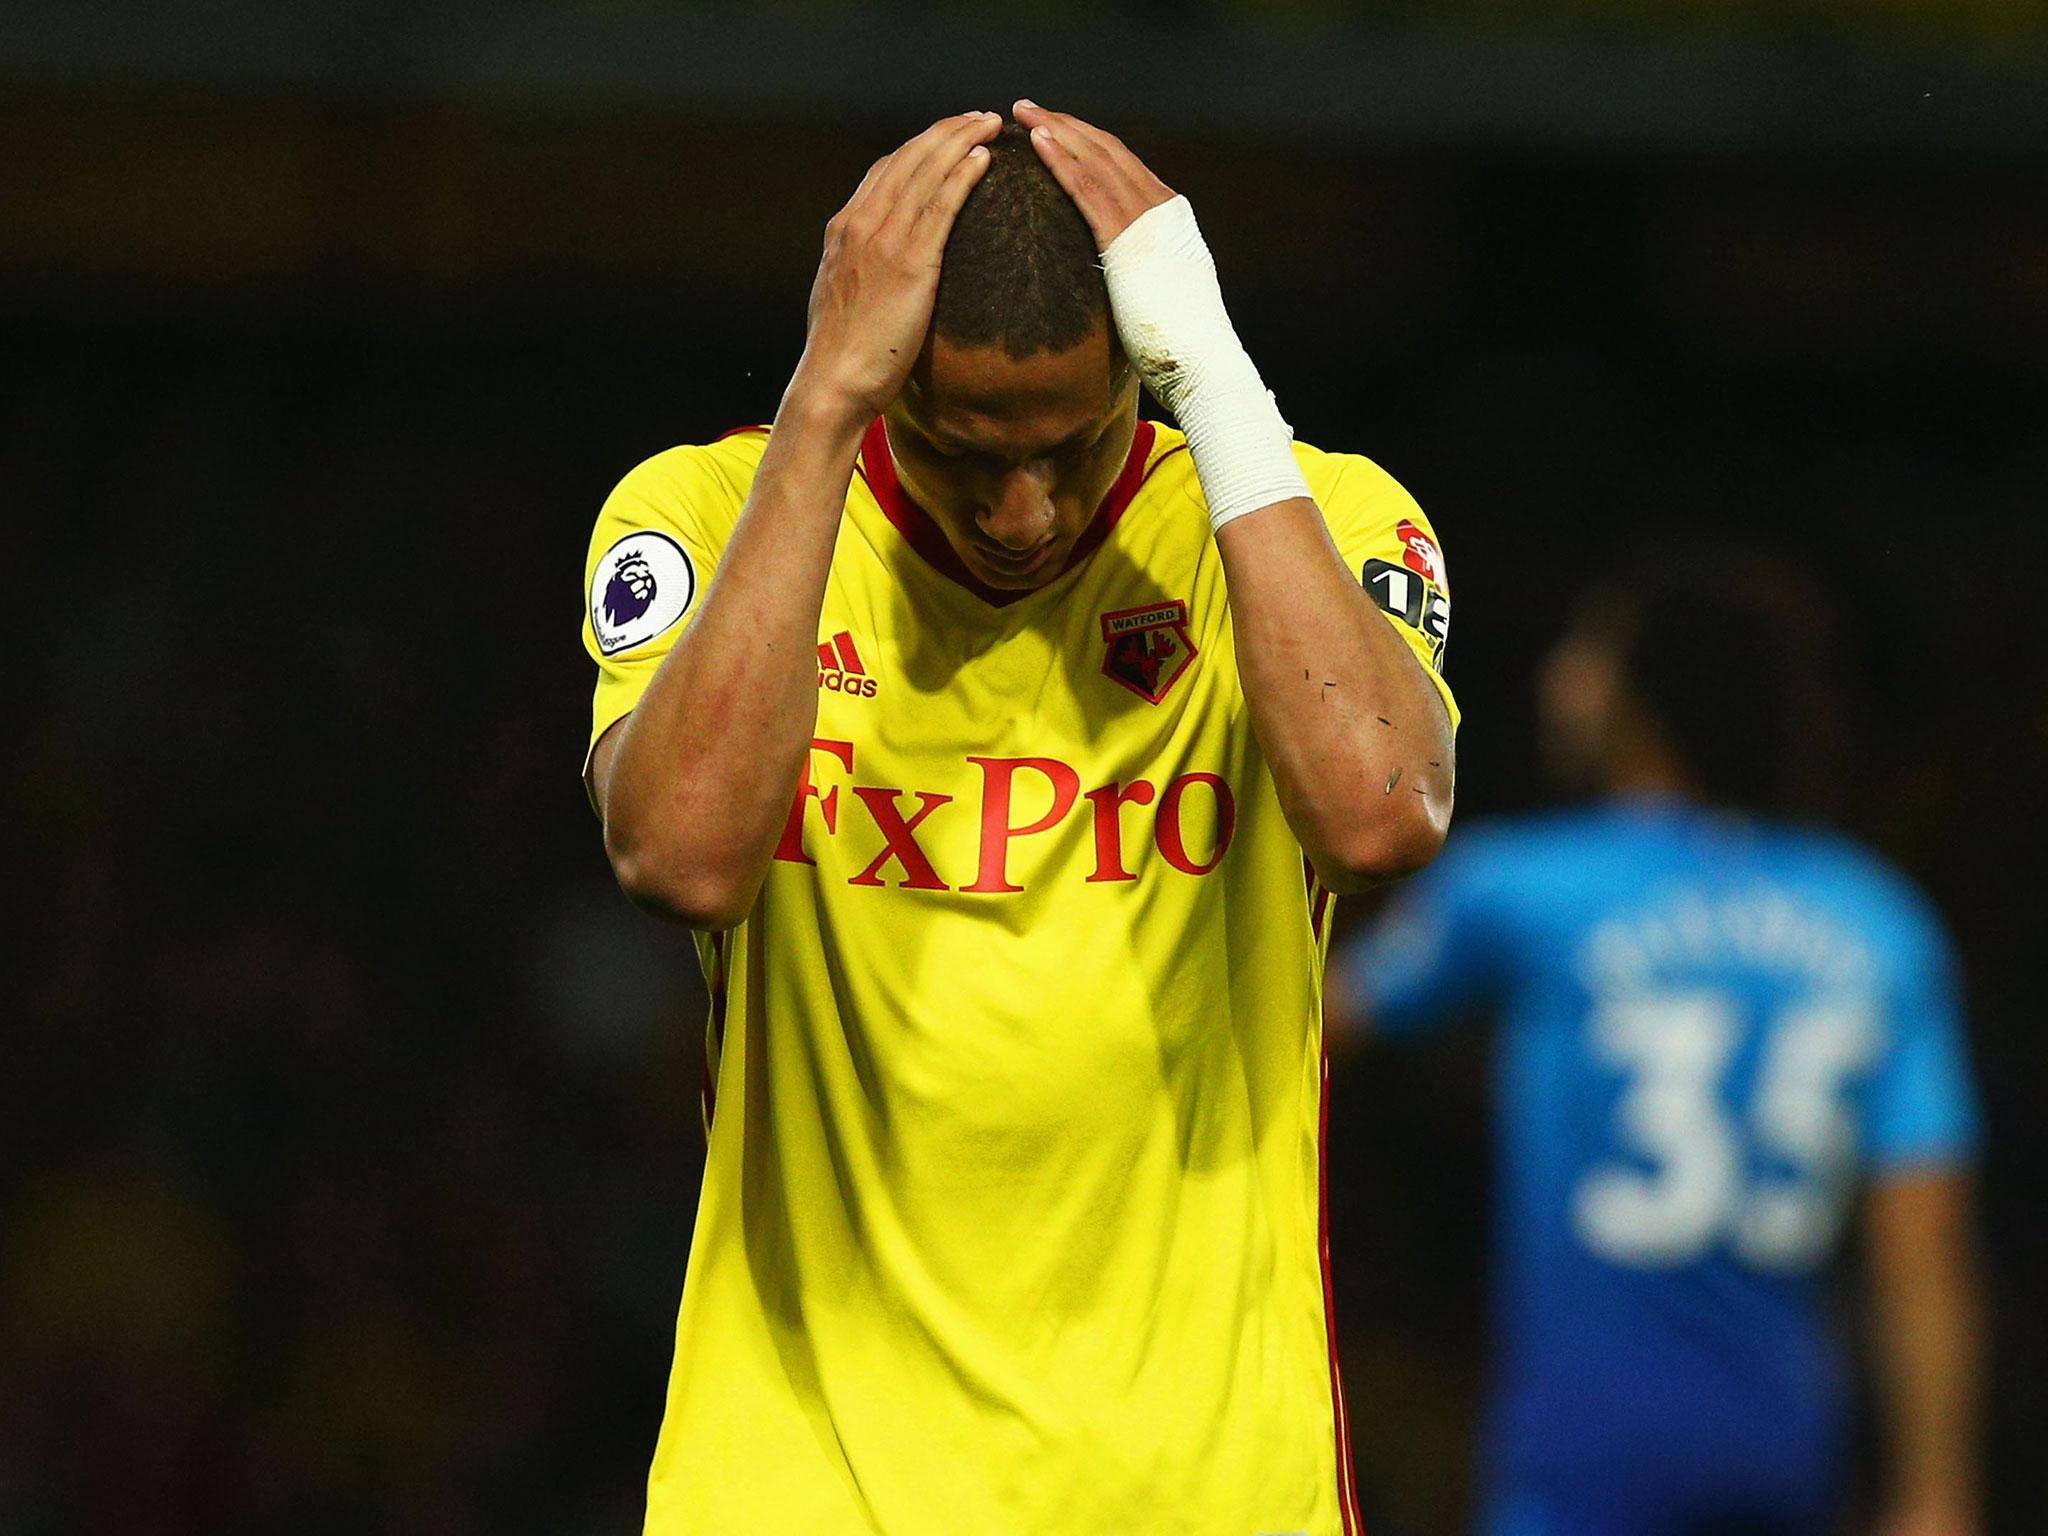 Richarlison could face retrospective action this week